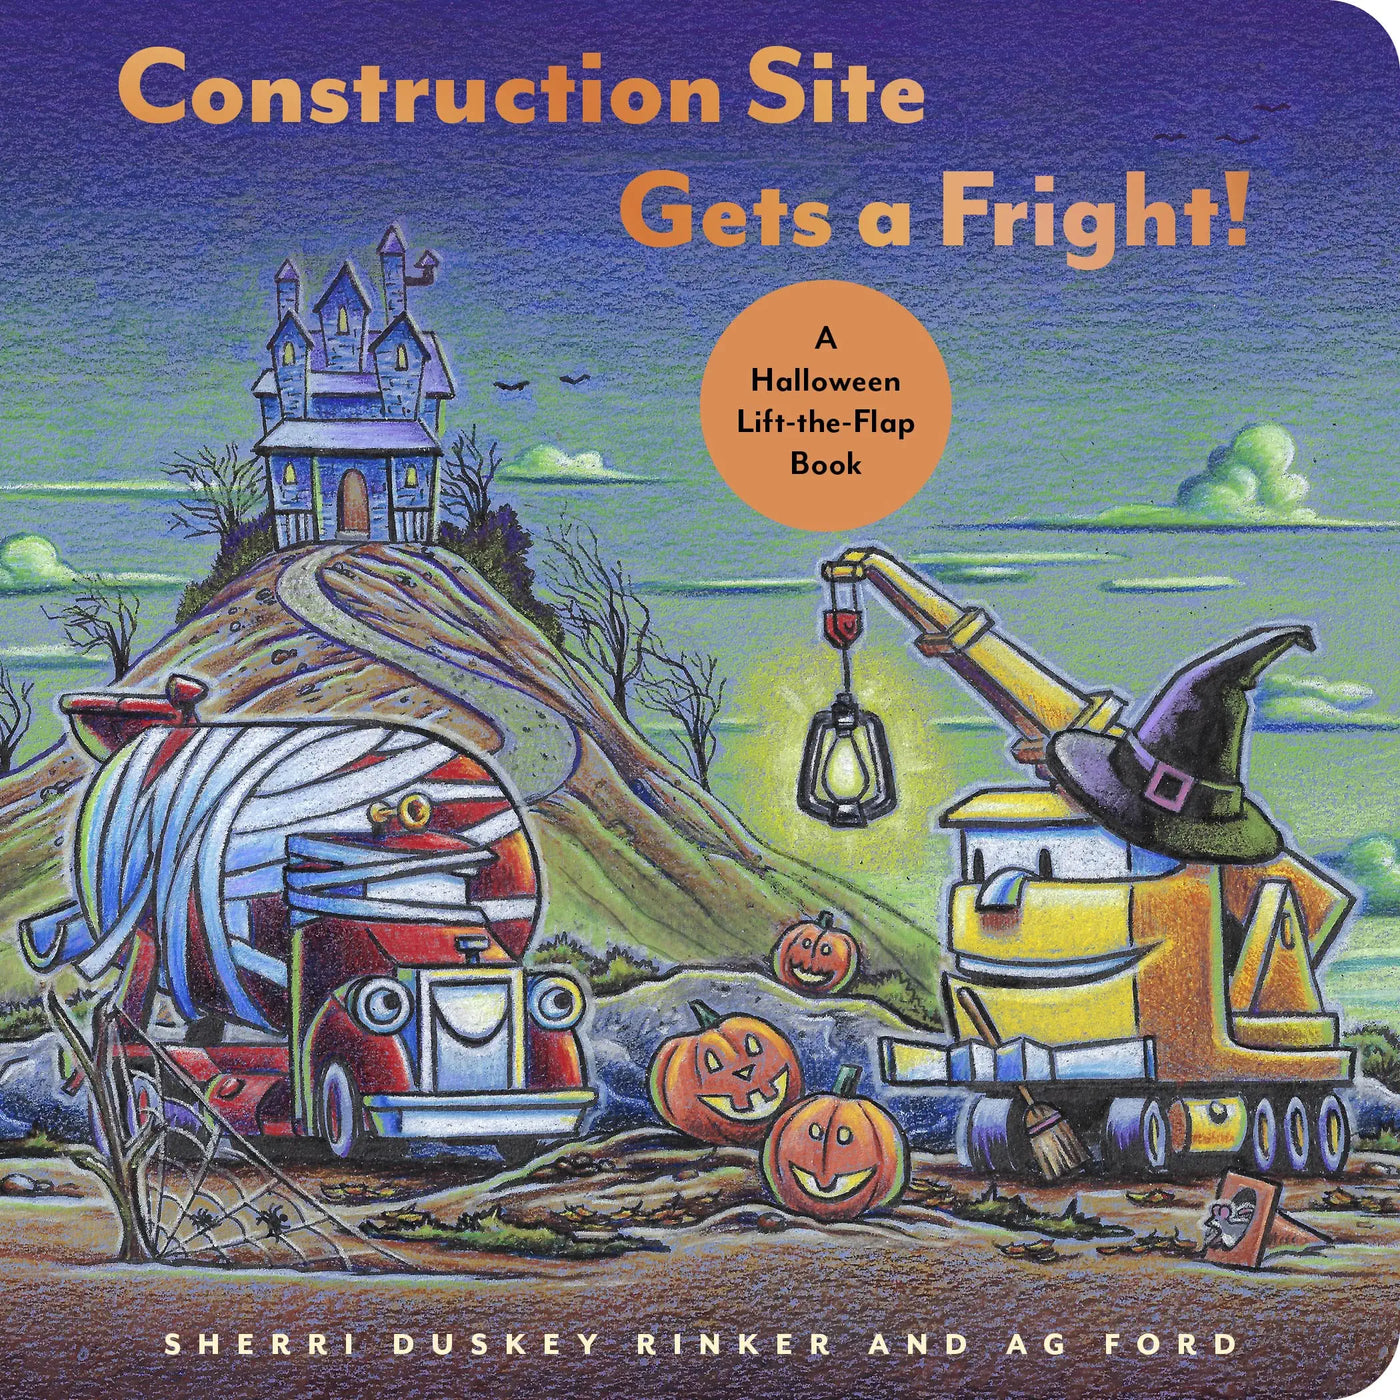 Construction Site Gets a Fright!: A Halloween Lift-the-Flap Book - Breckenridge Baby